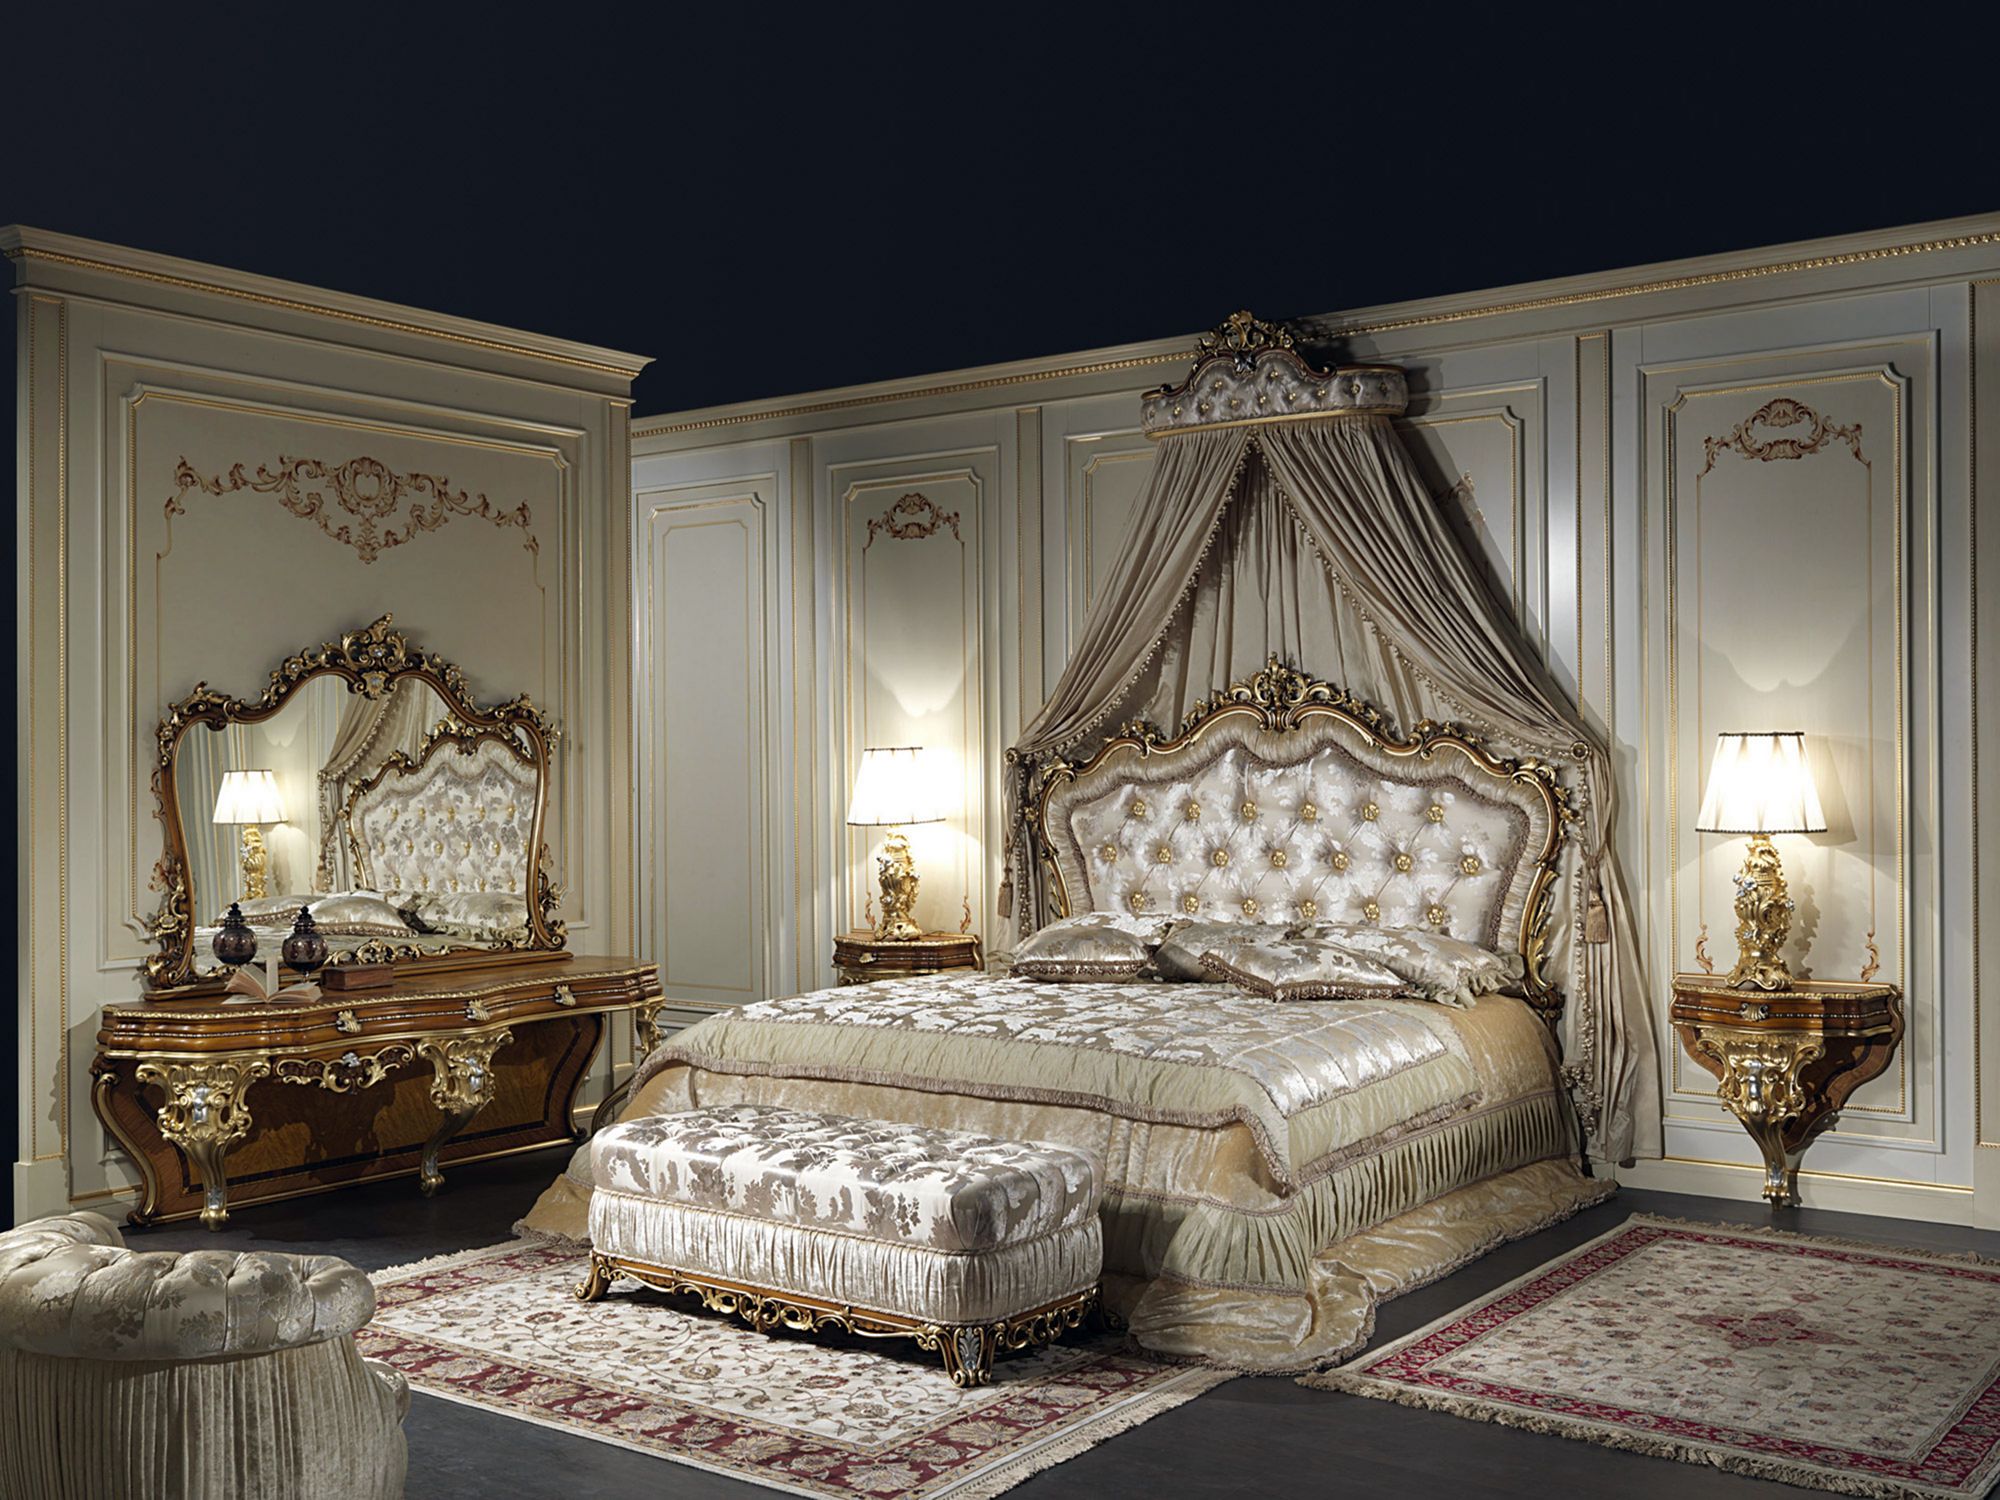 Classic Gold Bedroom From Vimercatimeda